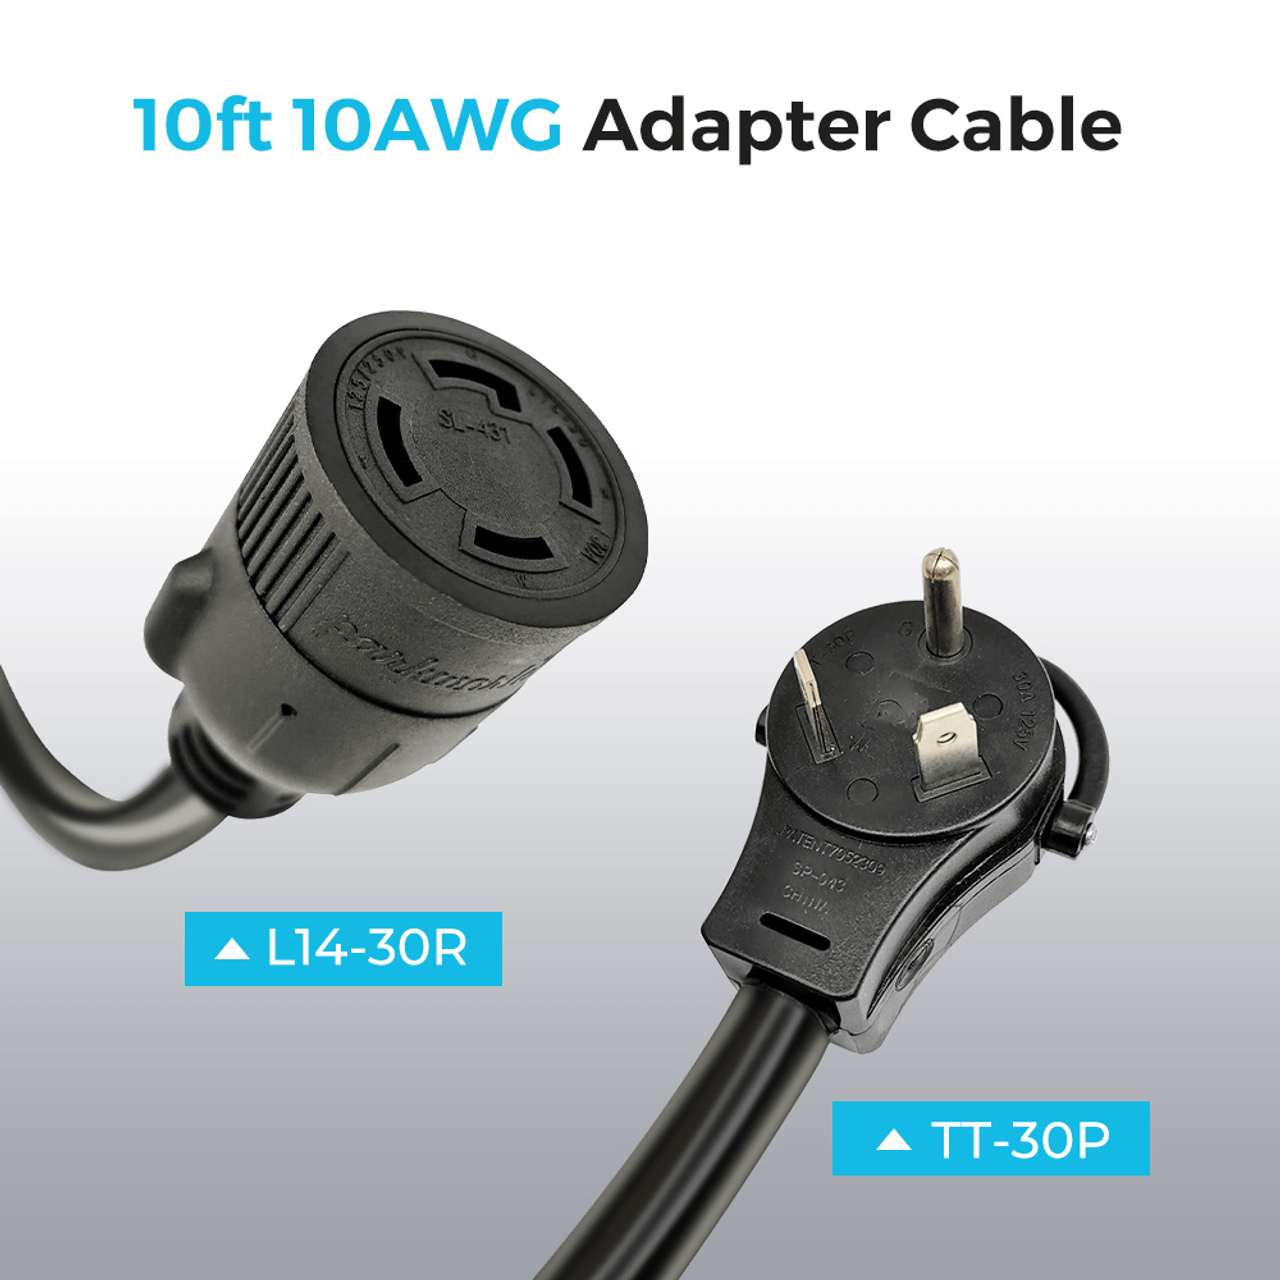 Renogy Parkworld 10ft 10AWG TT-30P to L14-30R Adapter Cable Renogy Solar Wiring Cables & Connectors